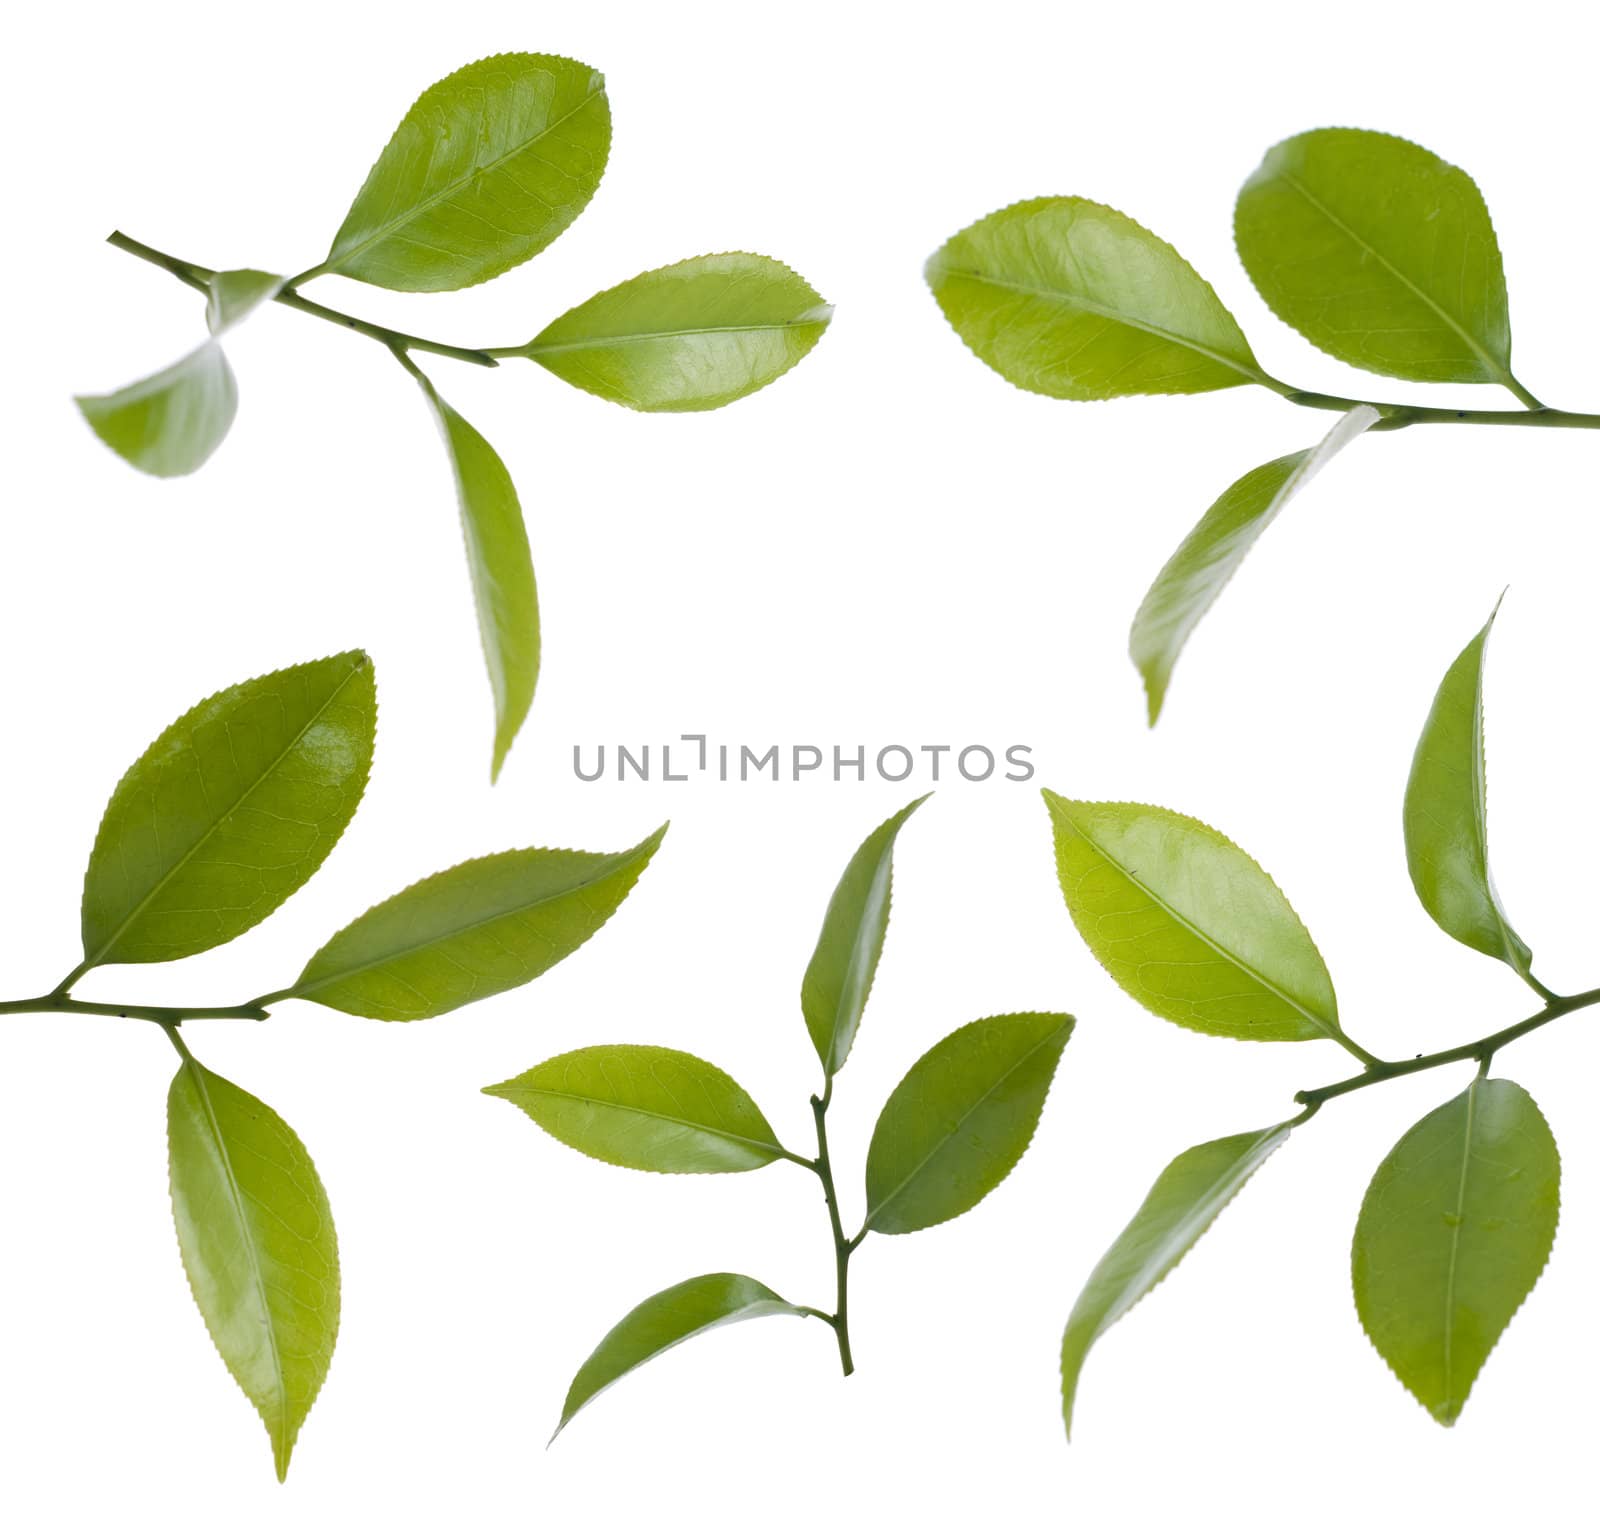 Camelia leafs isolated on white background.